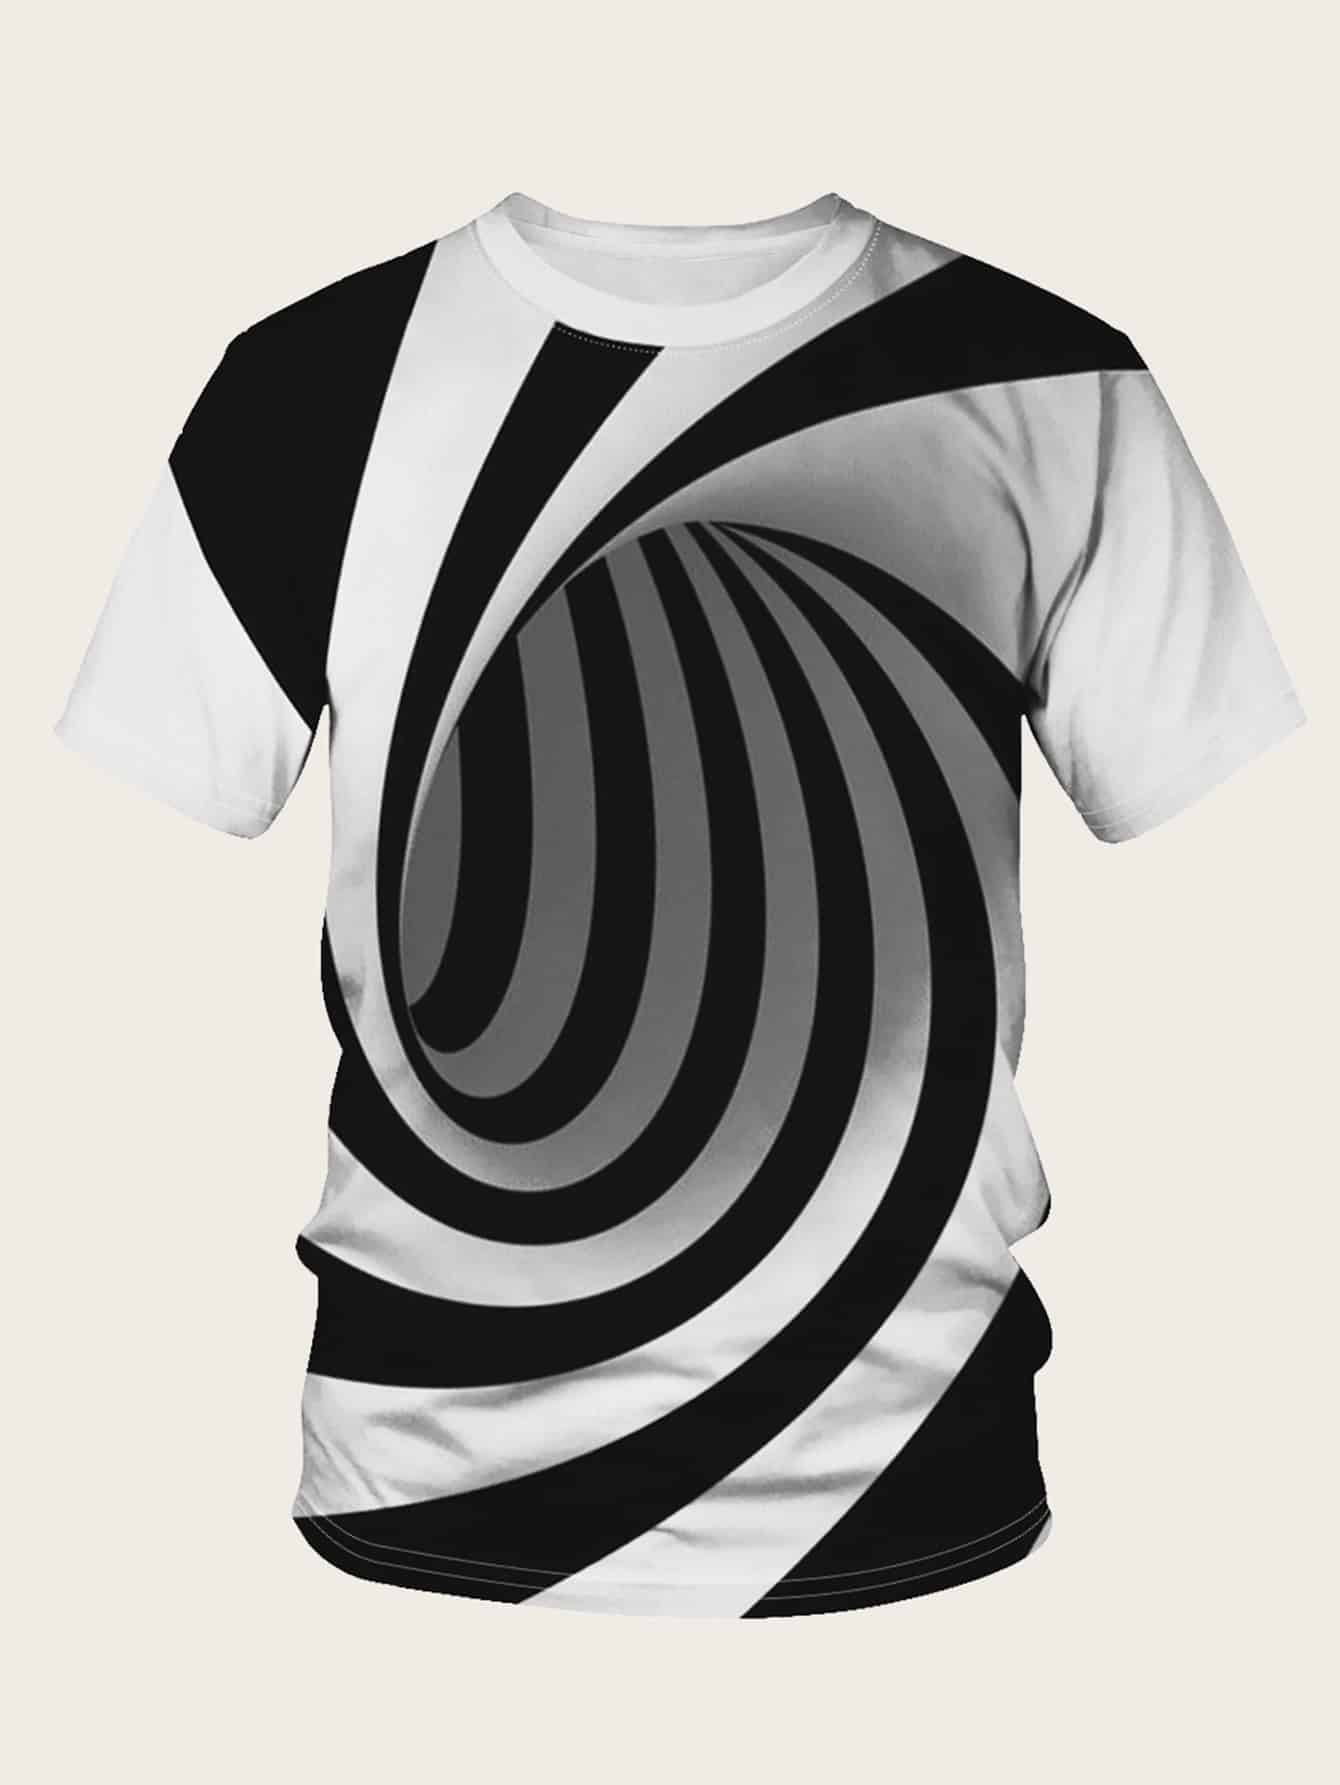 Black and White Round Neck 3D Spiral Print Tee